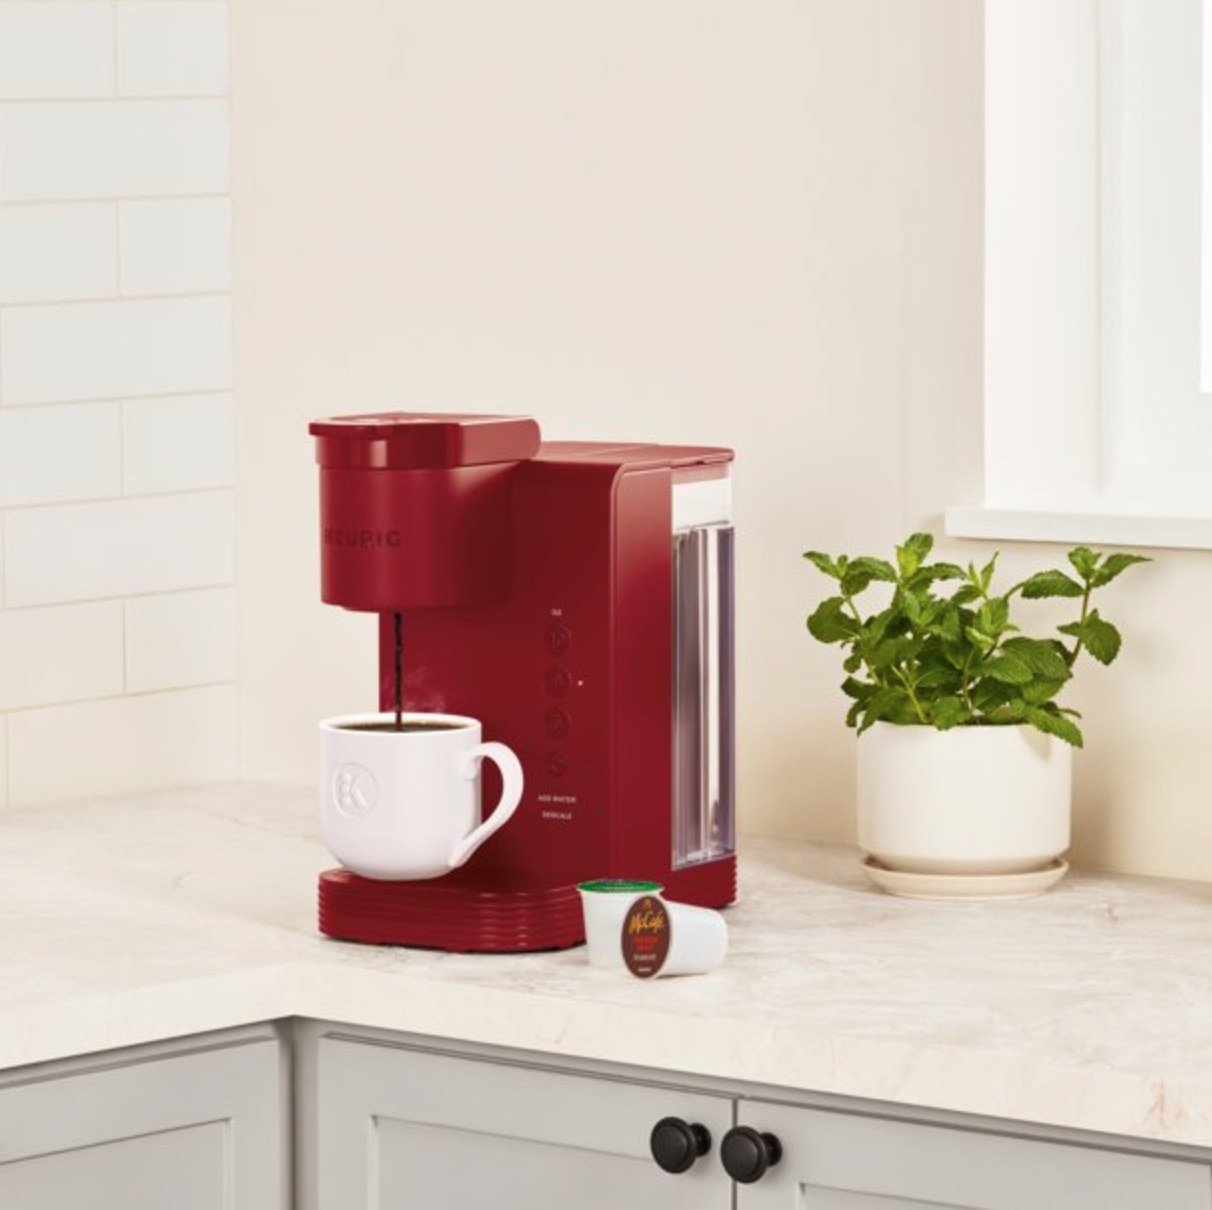 the small red coffee maker on a counter with a plant